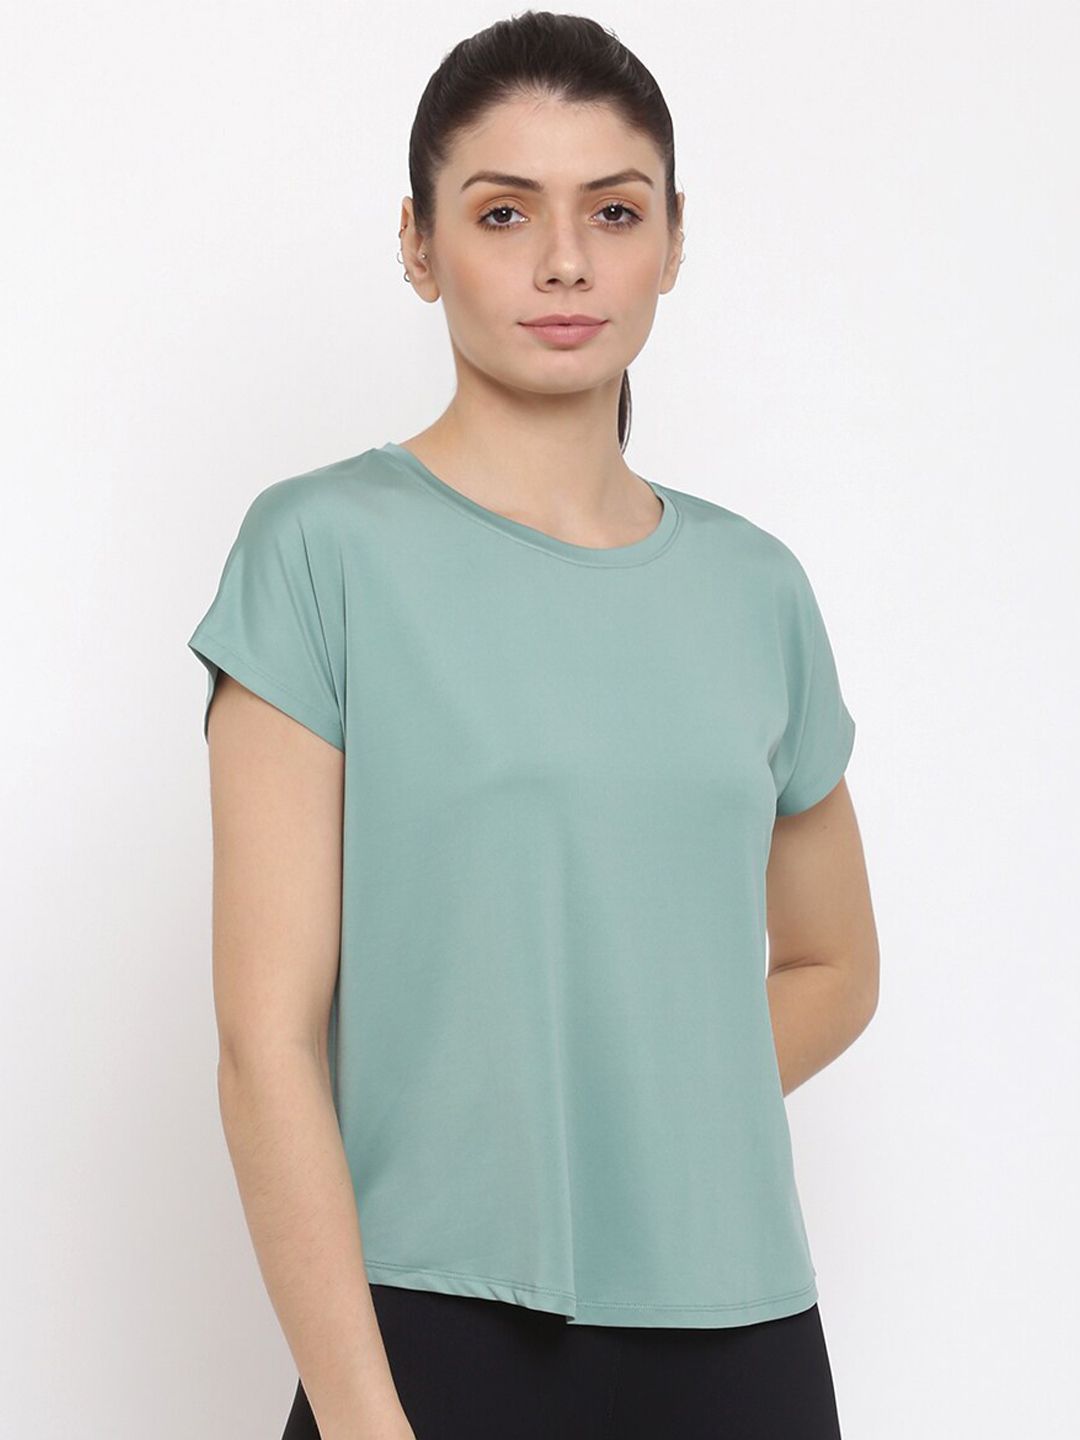 MKH Women Green Extended Sleeves Dri-FIT T-shirt Price in India